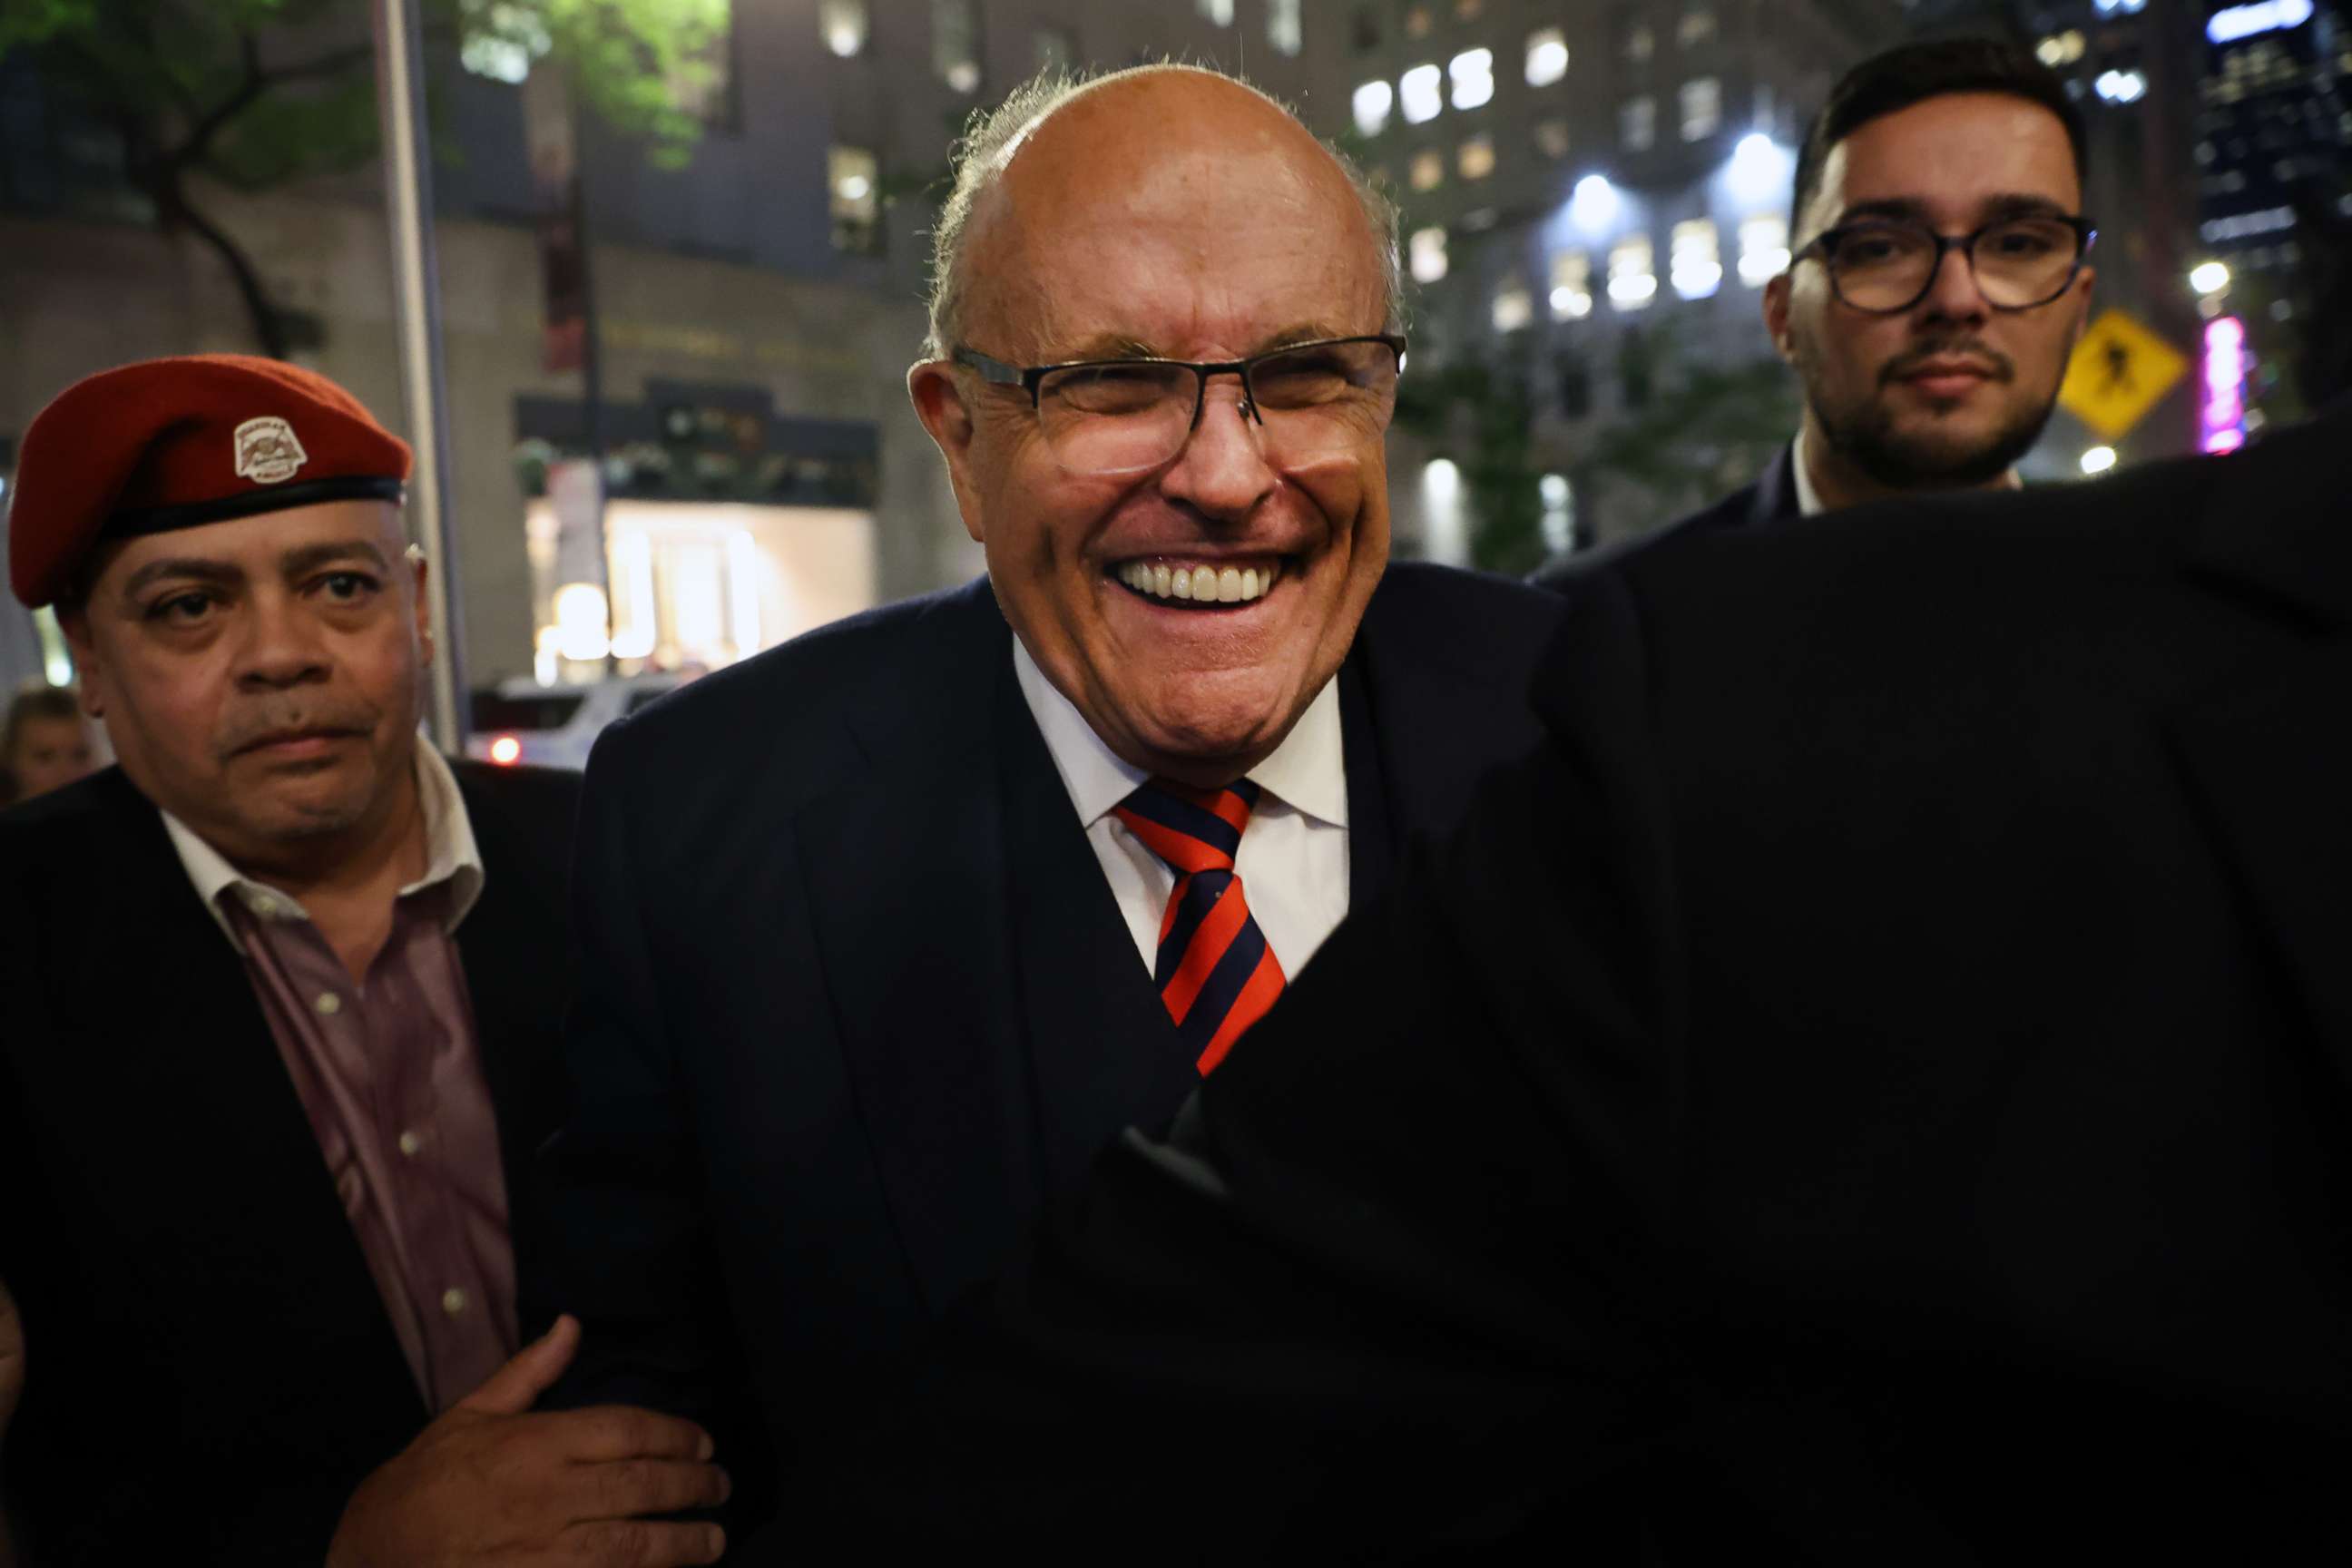 PHOTO: Rudy Giuliani appears in support of his son, New York Republican gubernatorial primary candidate Andrew Giuliani, at an election night watch party in Manhattan on June 28, 2022, in New York City.